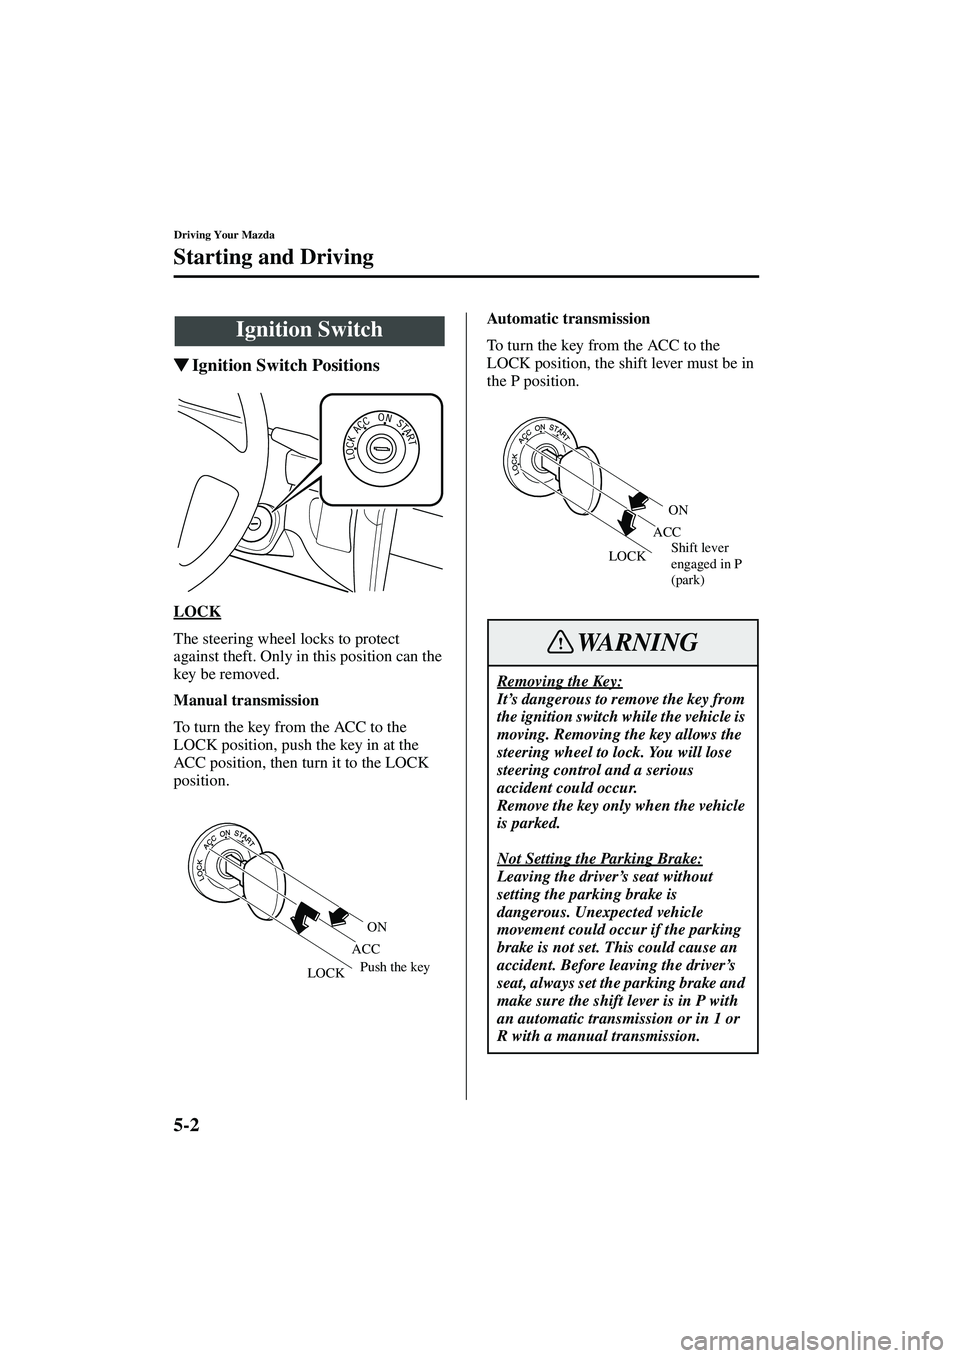 MAZDA MODEL MX-5 MIATA 2004  Owners Manual 5-2
Driving Your Mazda
Form No. 8S15-EA-03G
Starting and Driving
Ignition Switch Positions
LOCK
The steering wheel locks to protect 
against theft. Only in this position can the 
key be removed.
Manu